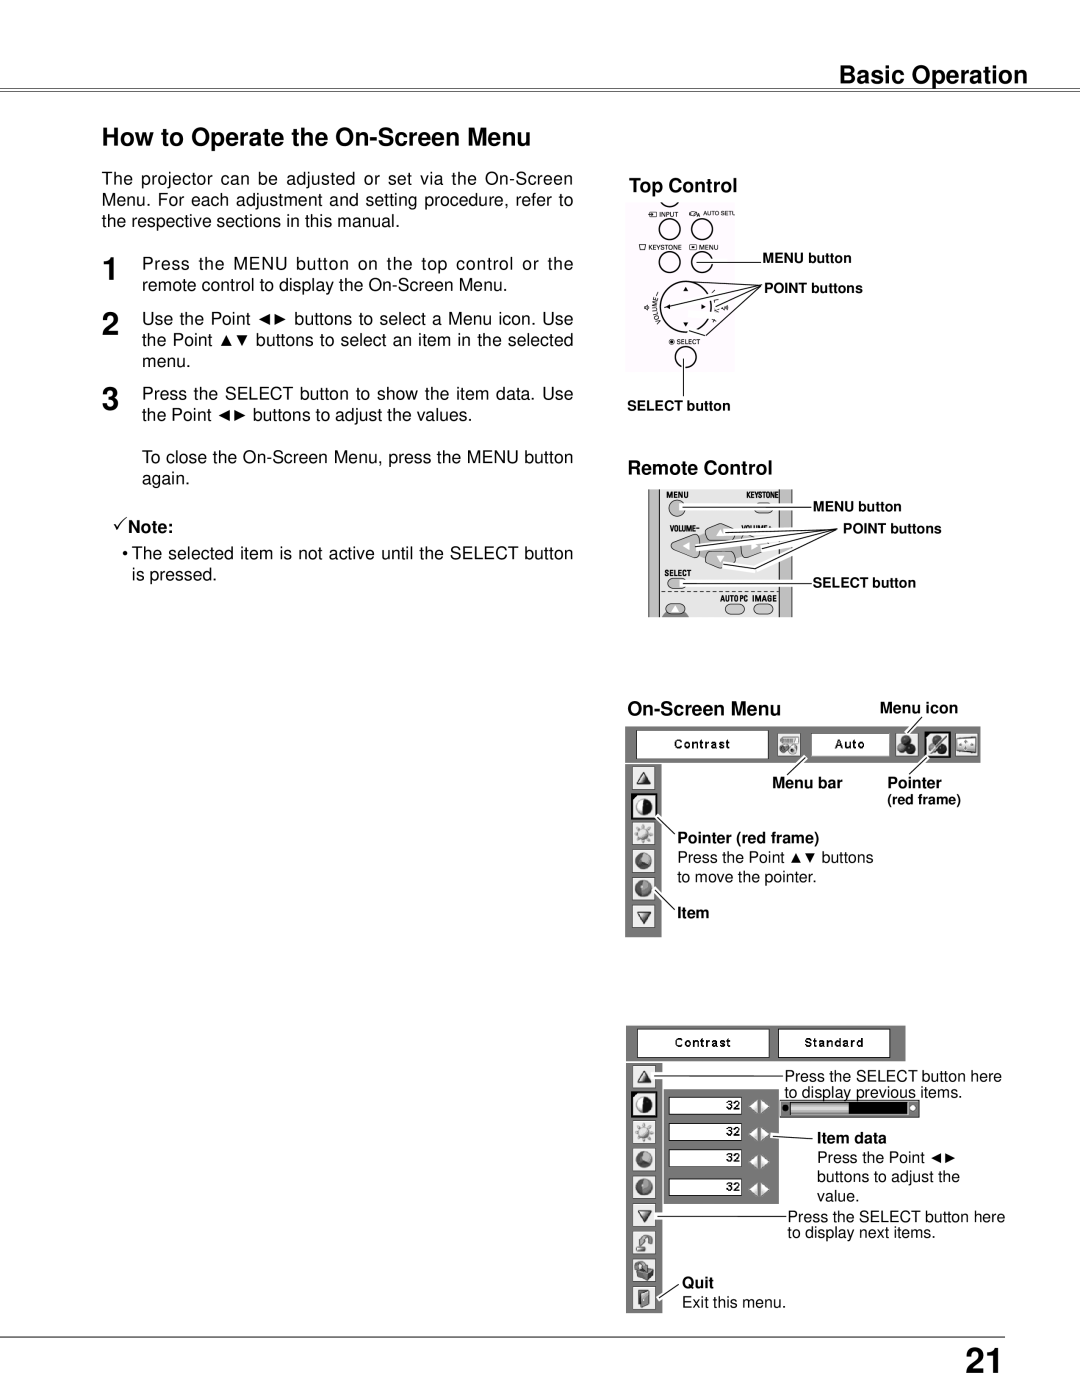 Eiki LC-XB42 owner manual Basic Operation, How to Operate the On-Screen Menu, Top Control, Remote Control, Note 